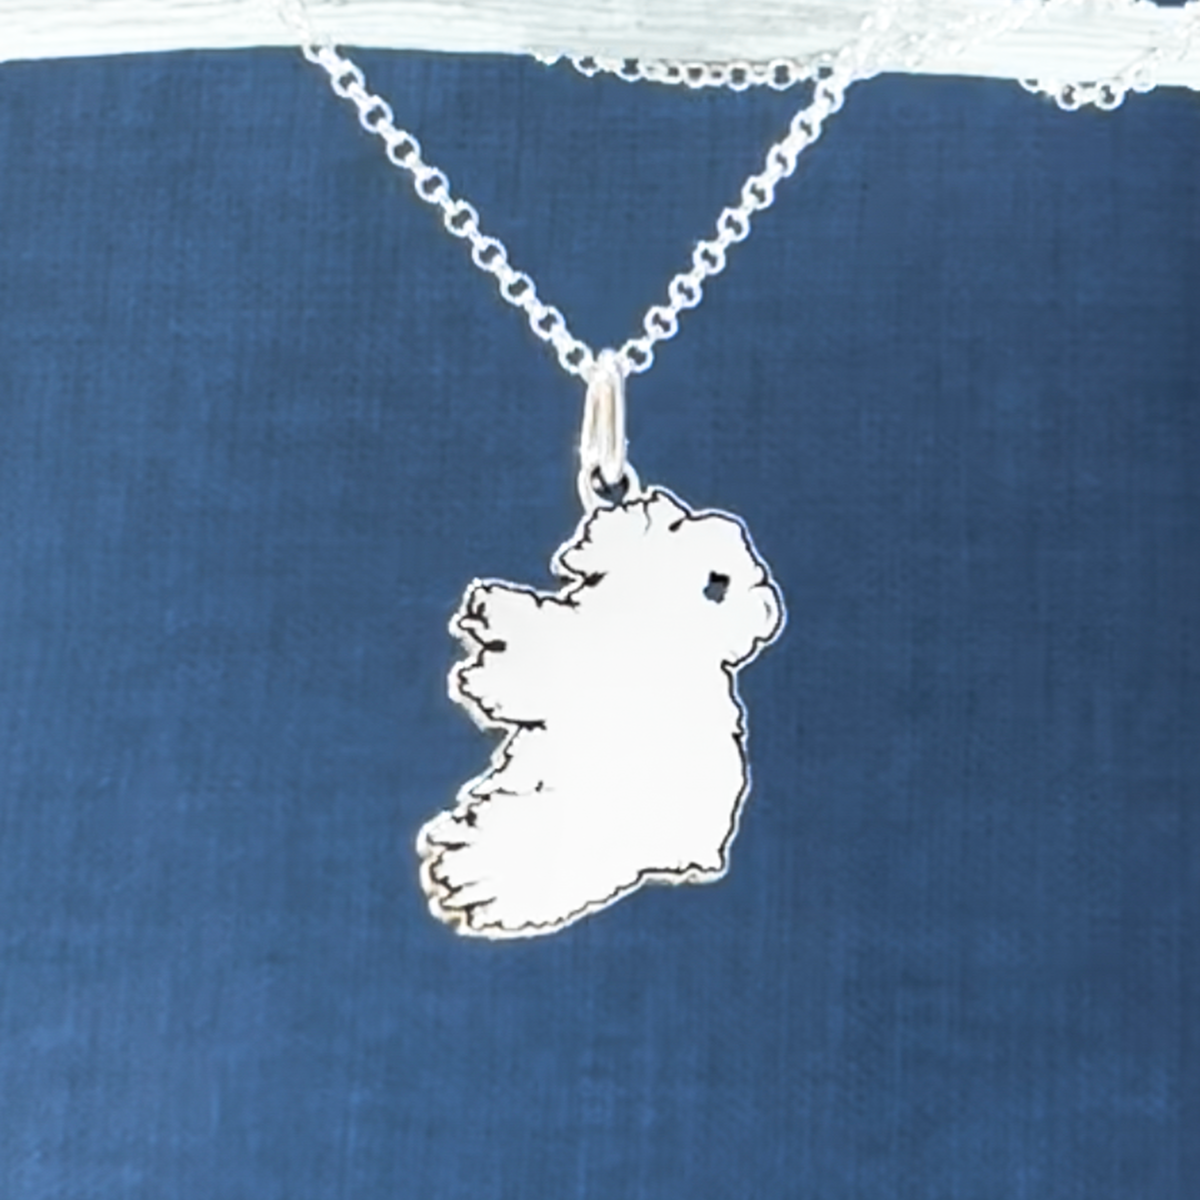 Experience the captivating allure of Ireland with the EIRE - Map with outline Of Ireland Pendant. The pendant measures 15mm by 23mm and has a bail that fits up to a 3mm chain. It also includes a 1.4mm silver rolo chain that can be effortlessly adjusted from 16" to 18". This exquisite pendant celebrates the magic of Ireland, making it an essential addition to any jewellery collection.